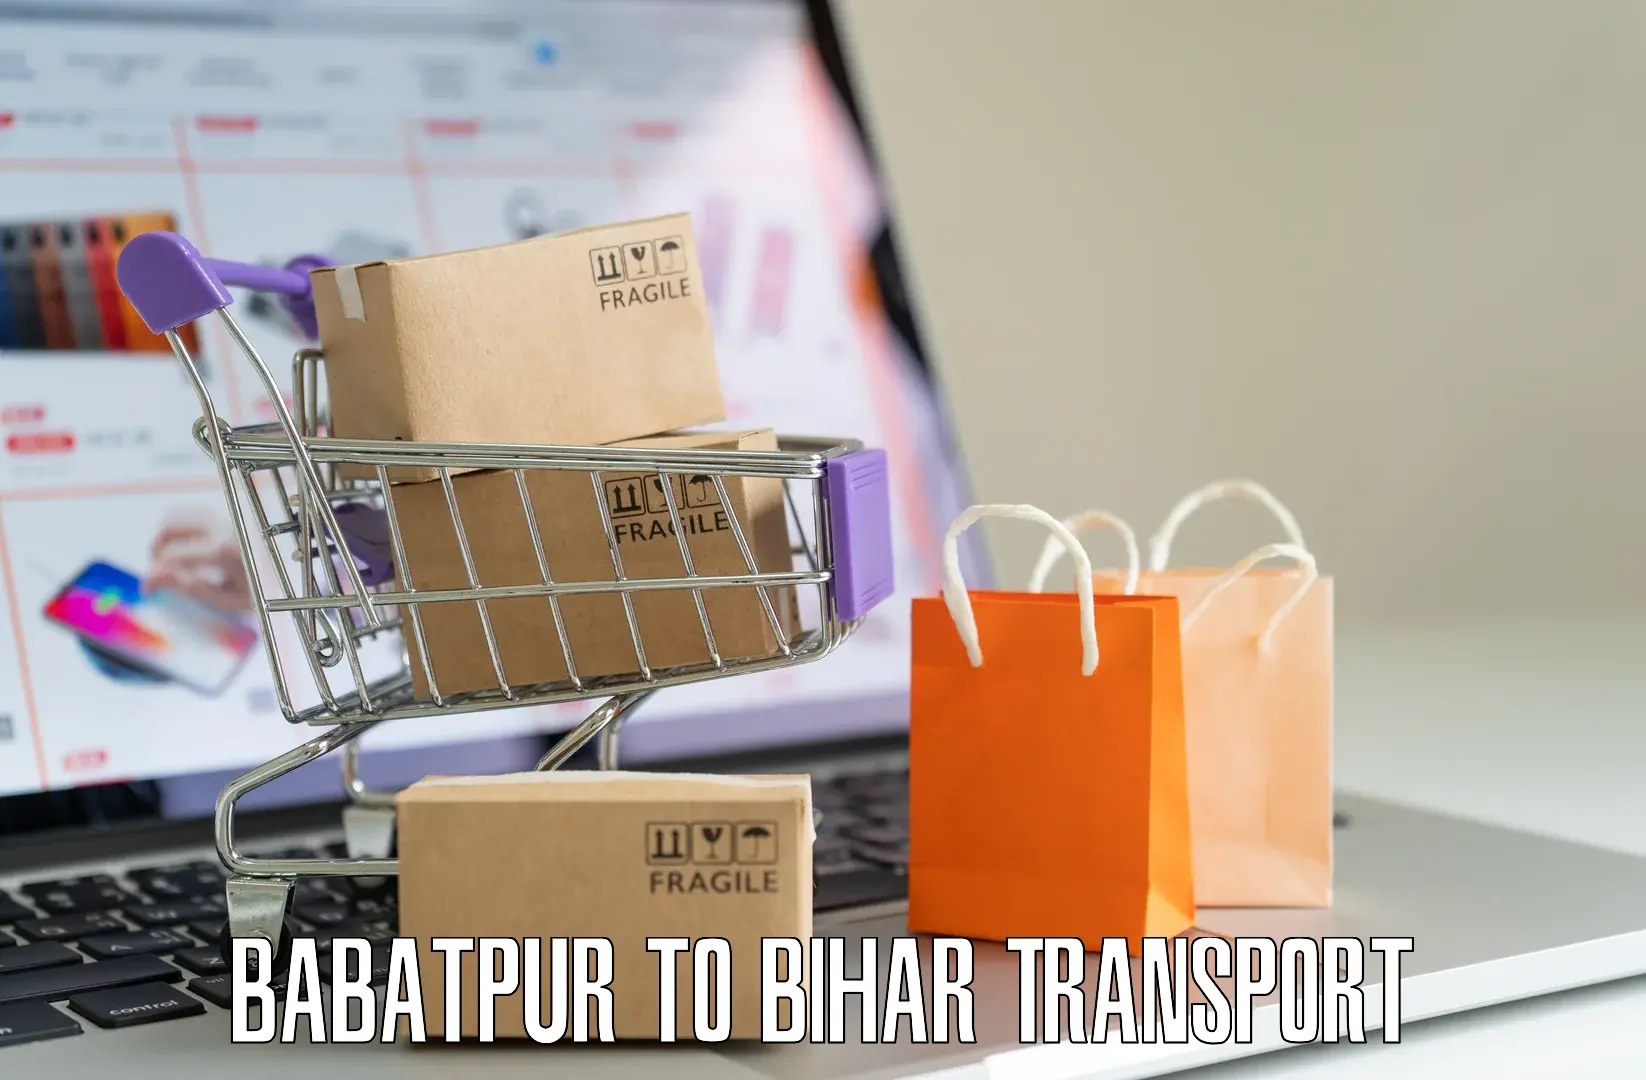 Nearby transport service Babatpur to Darbhanga